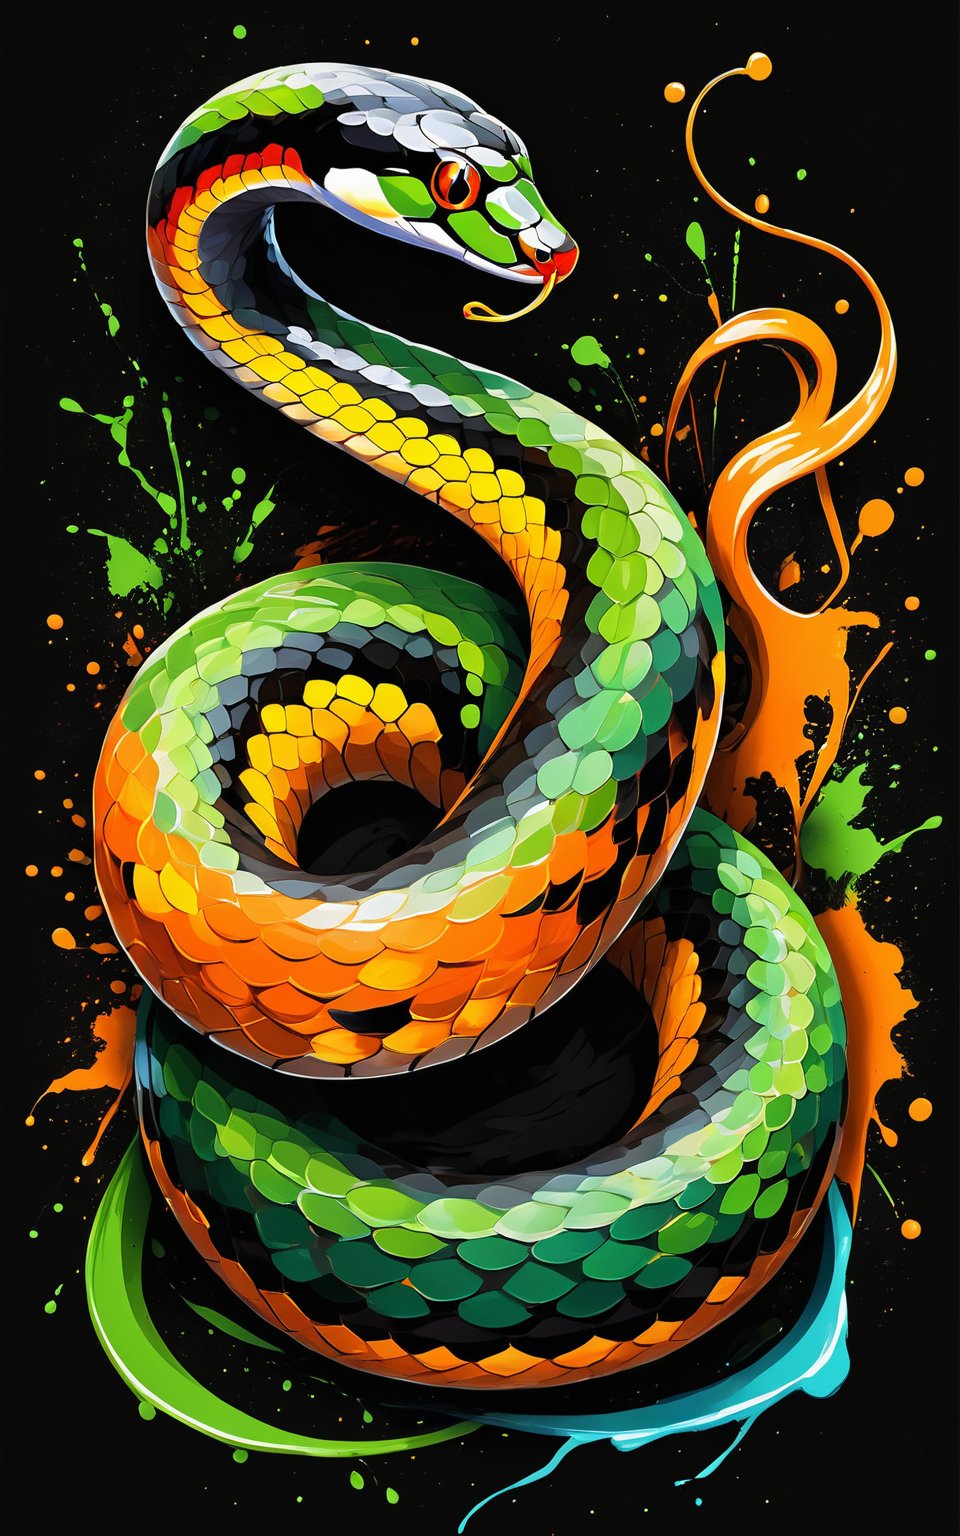 (Artistic bird illustration, high resolution, painted style, colored paint splatters), a [Snake] depicted in a painted style with dynamic and vibrant paint splatters. The main colors are [orange] and [green], set against a [black] background. The artwork captures the lively essence of the [Snake] through the use of bold paint splatters, creating a visually striking and energetic composition.